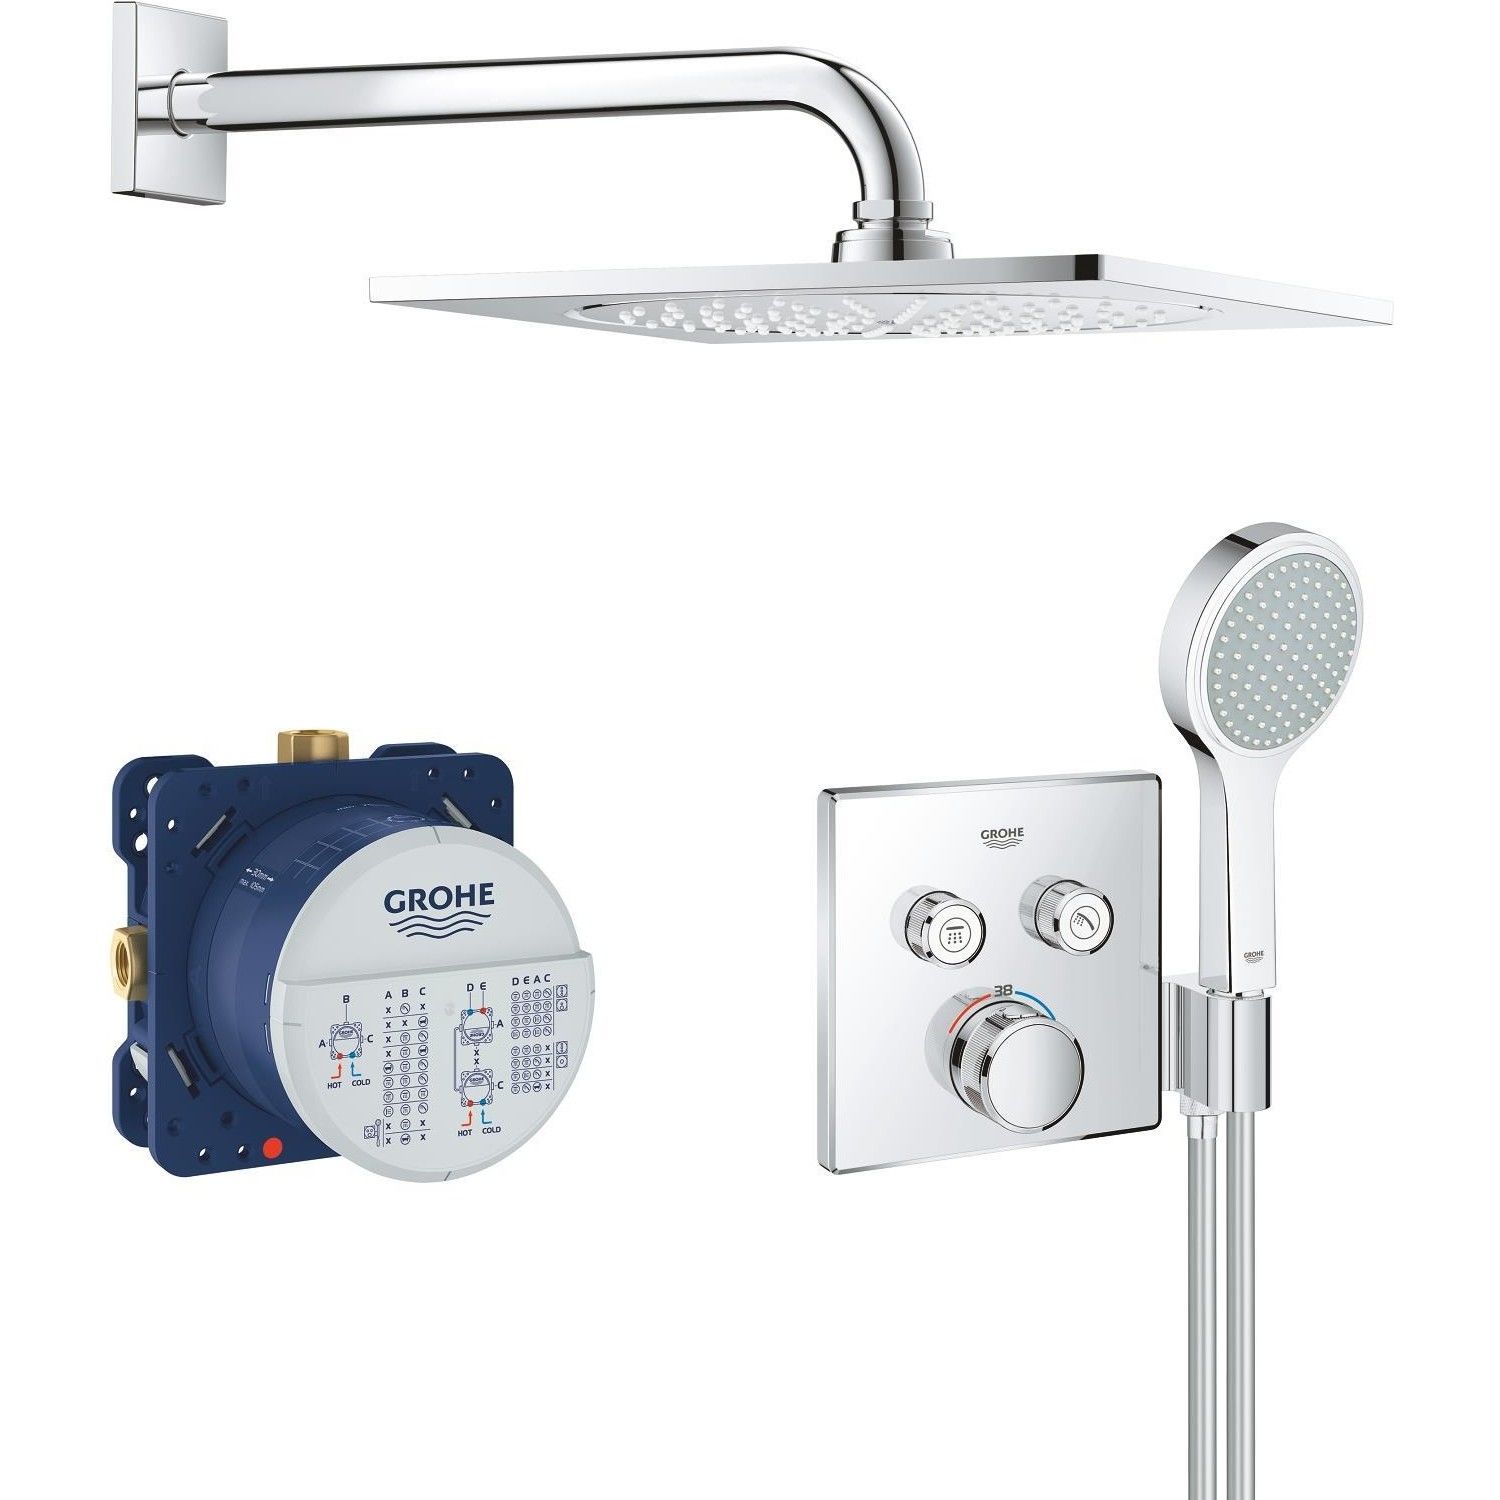 Grohe Grohtherm Smartcontrol Perfect Shower Set (34742000)